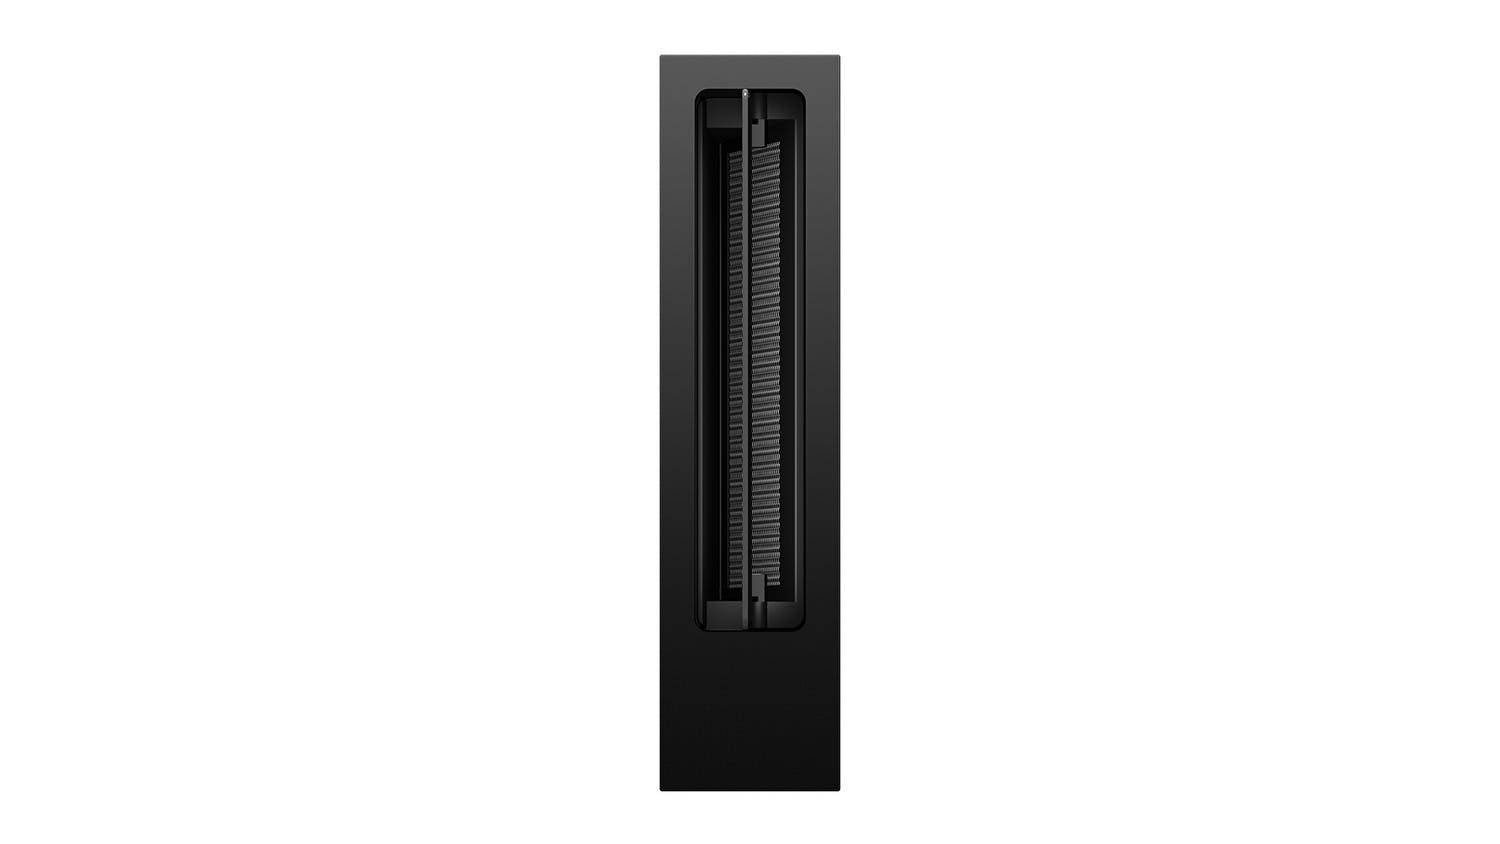 Fisher & Paykel 13cm Auxiliary Modular Ventilation Duct Out Downdraft Rangehood - Black (Series 11/CD13DB1)